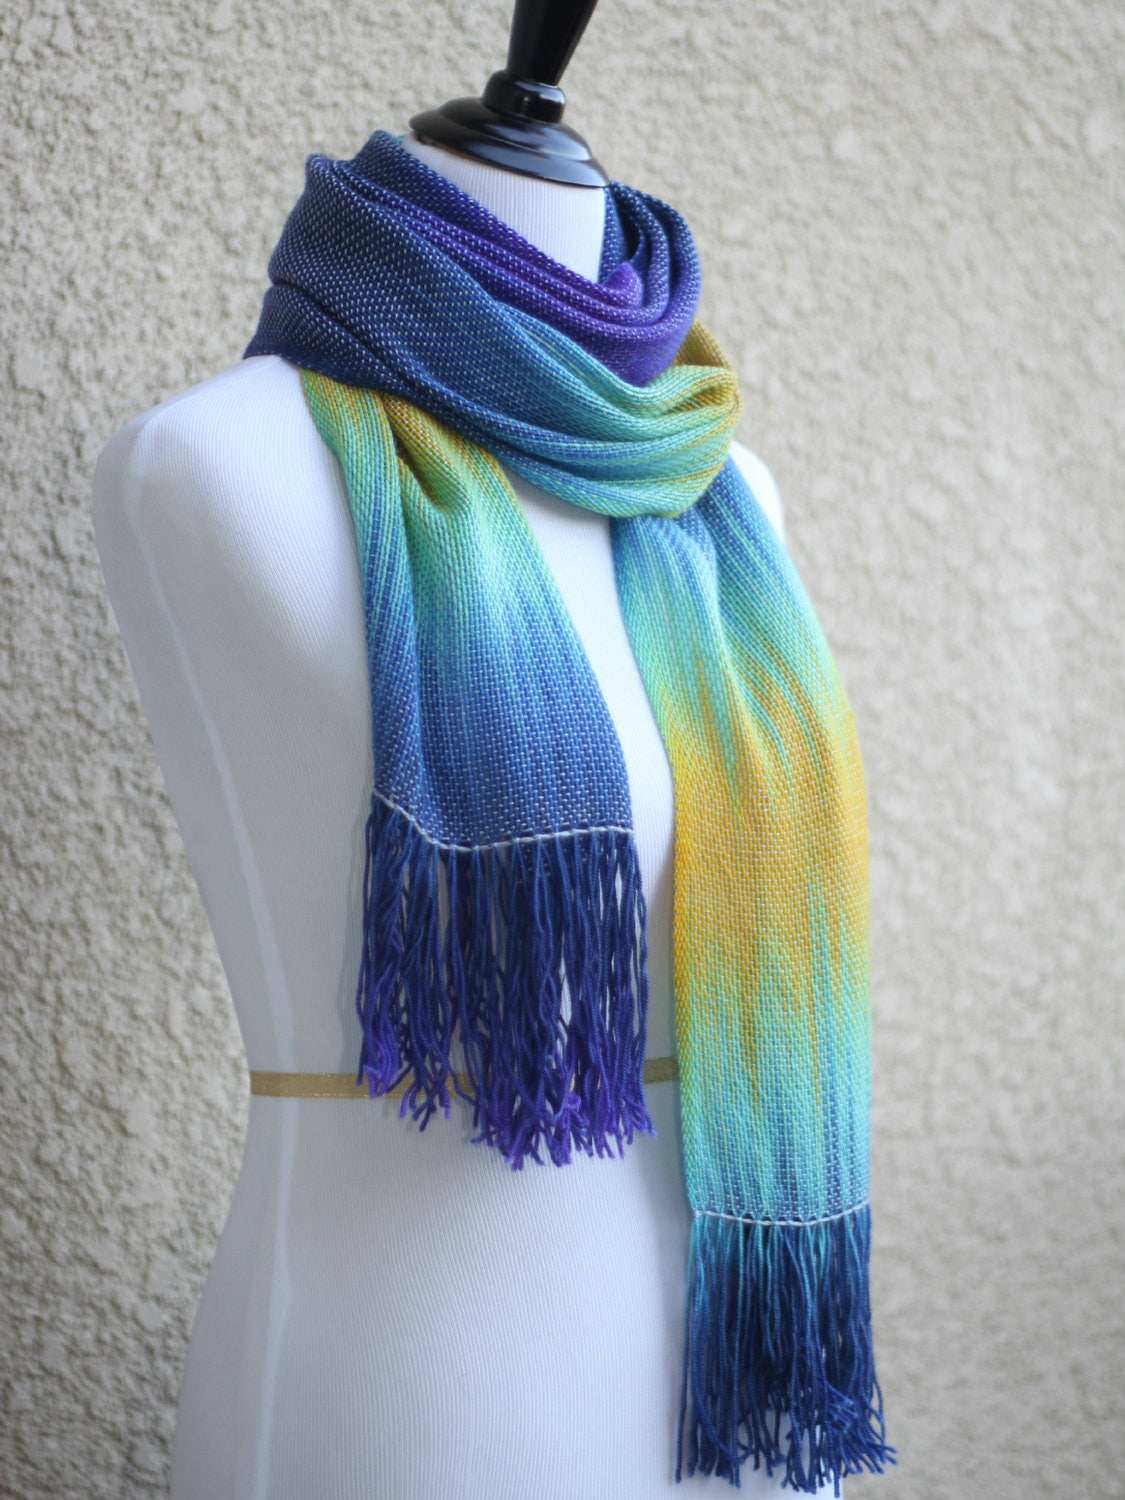 Blue and yellow scarf